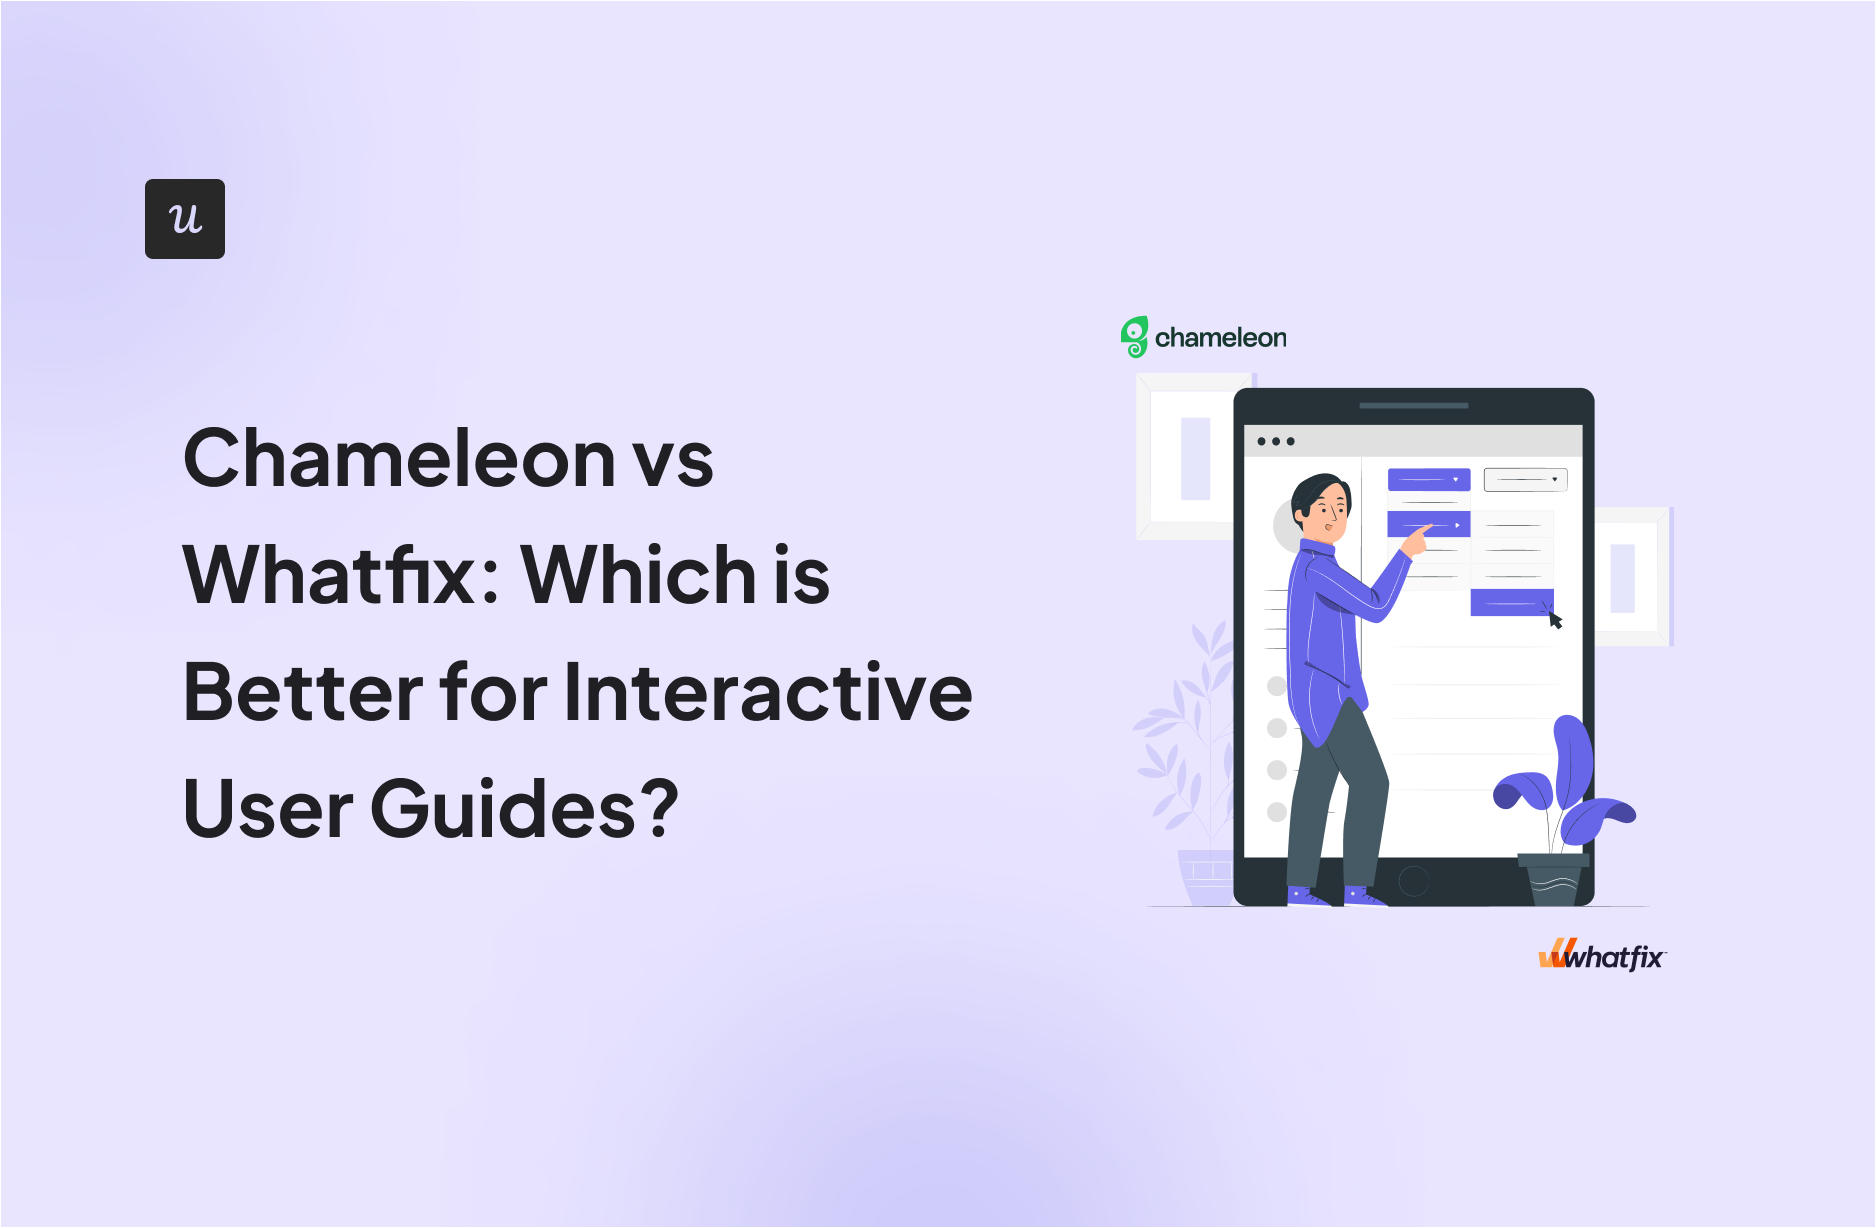 Chameleon vs Whatfix: Which is Better for Interactive User Guides?